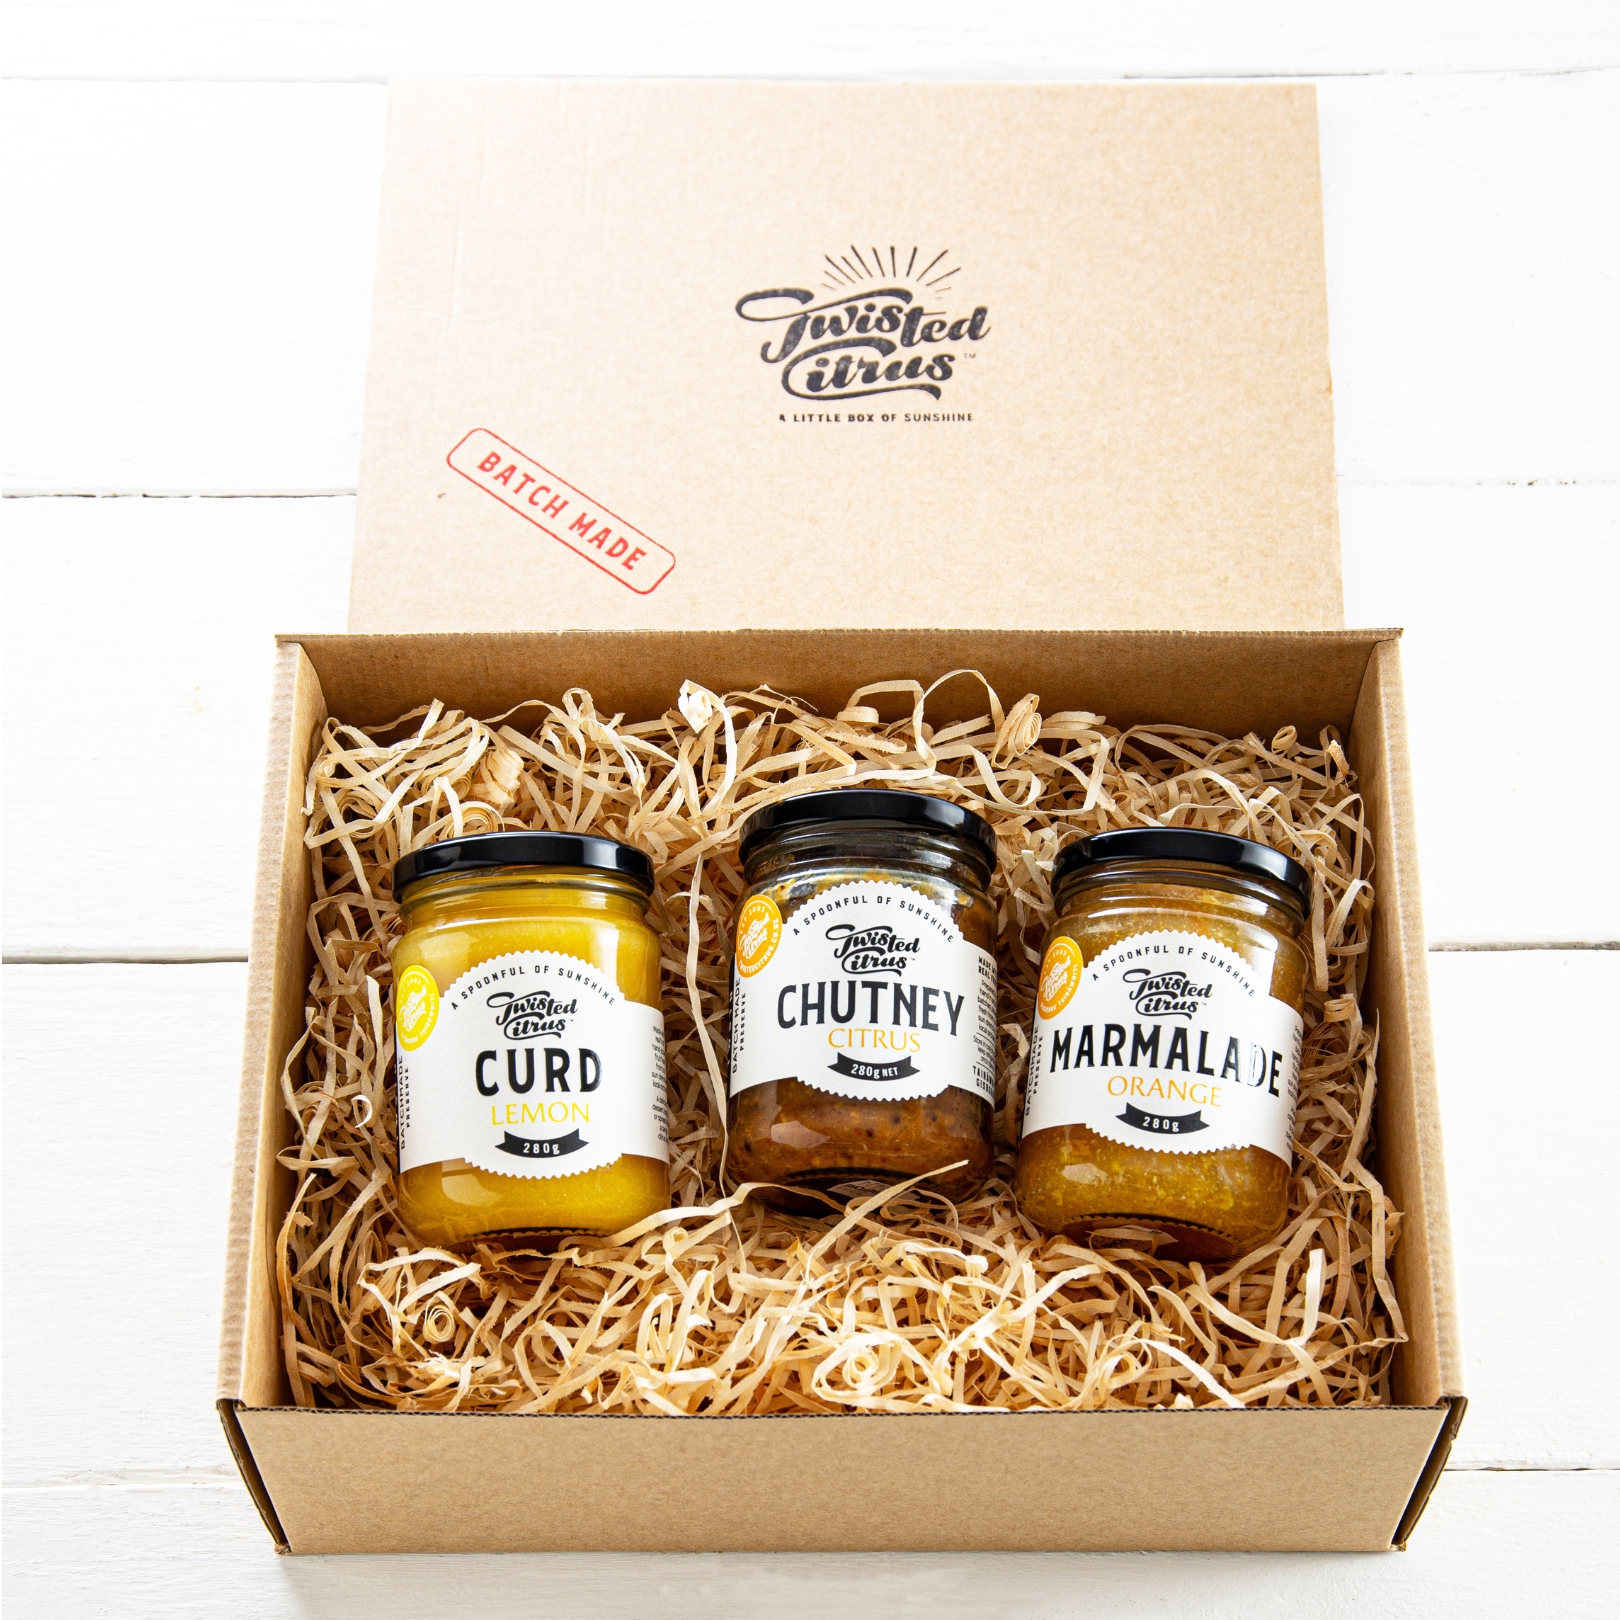 Buy Preserves Gift Box Online NZ - Twisted Citrus